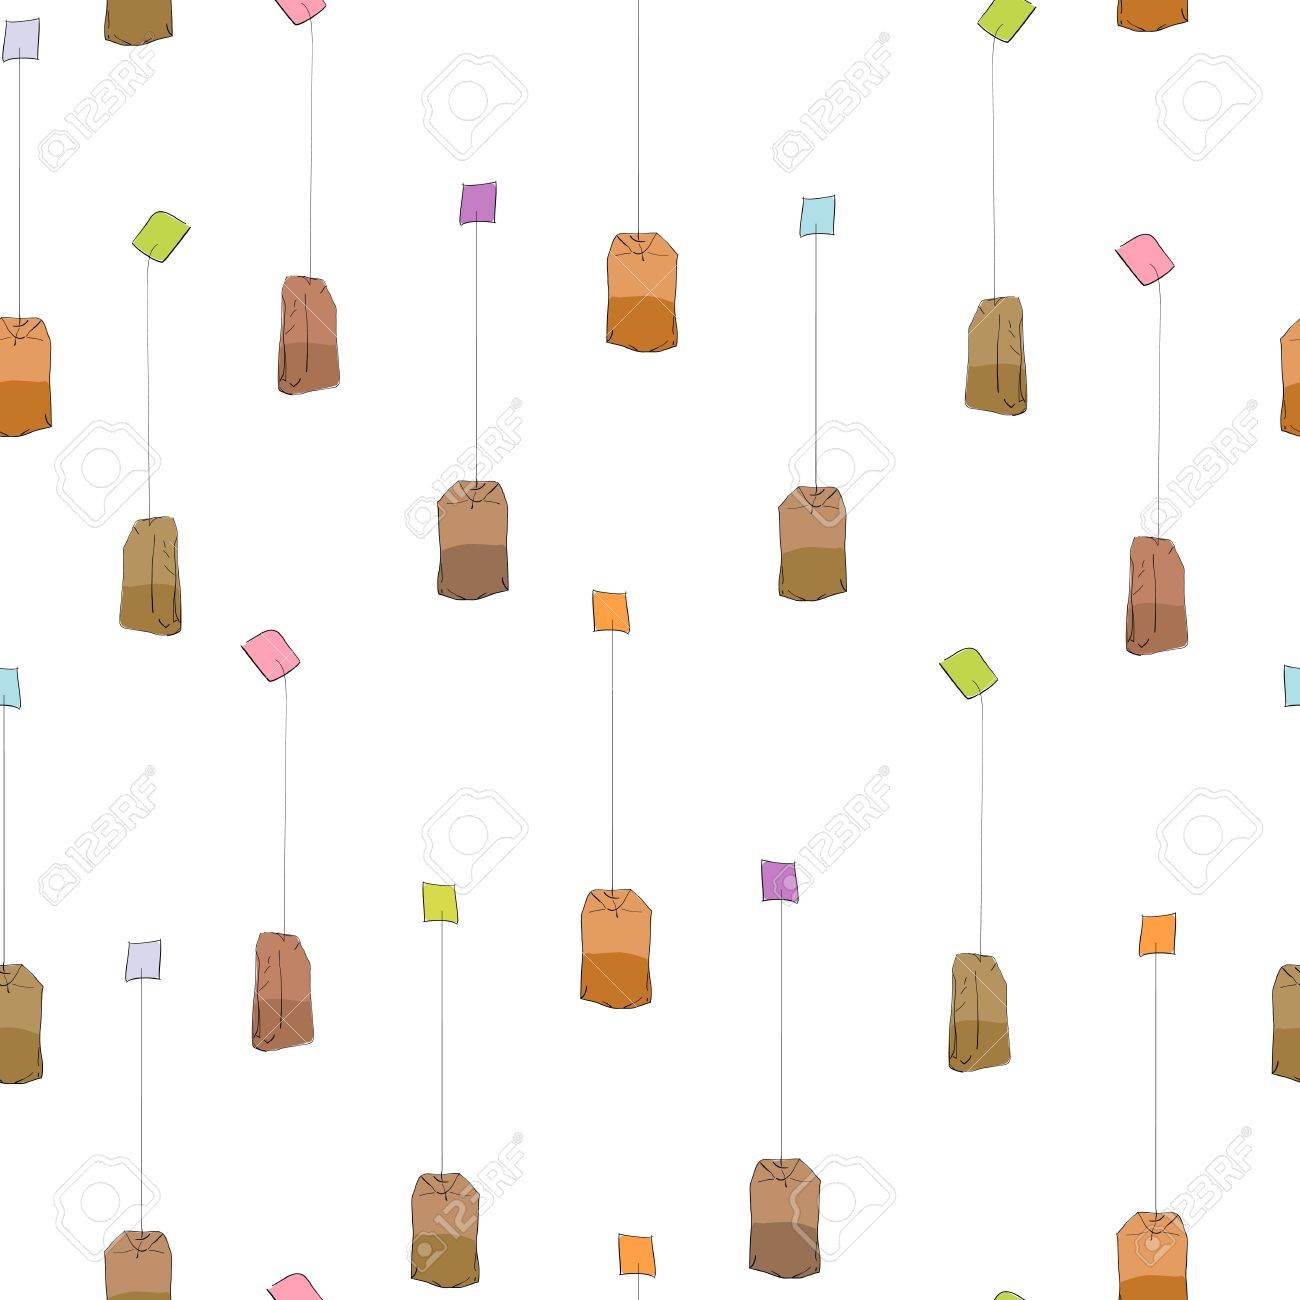 Simple Tea Bags Pattern Over Transparent Background Royalty